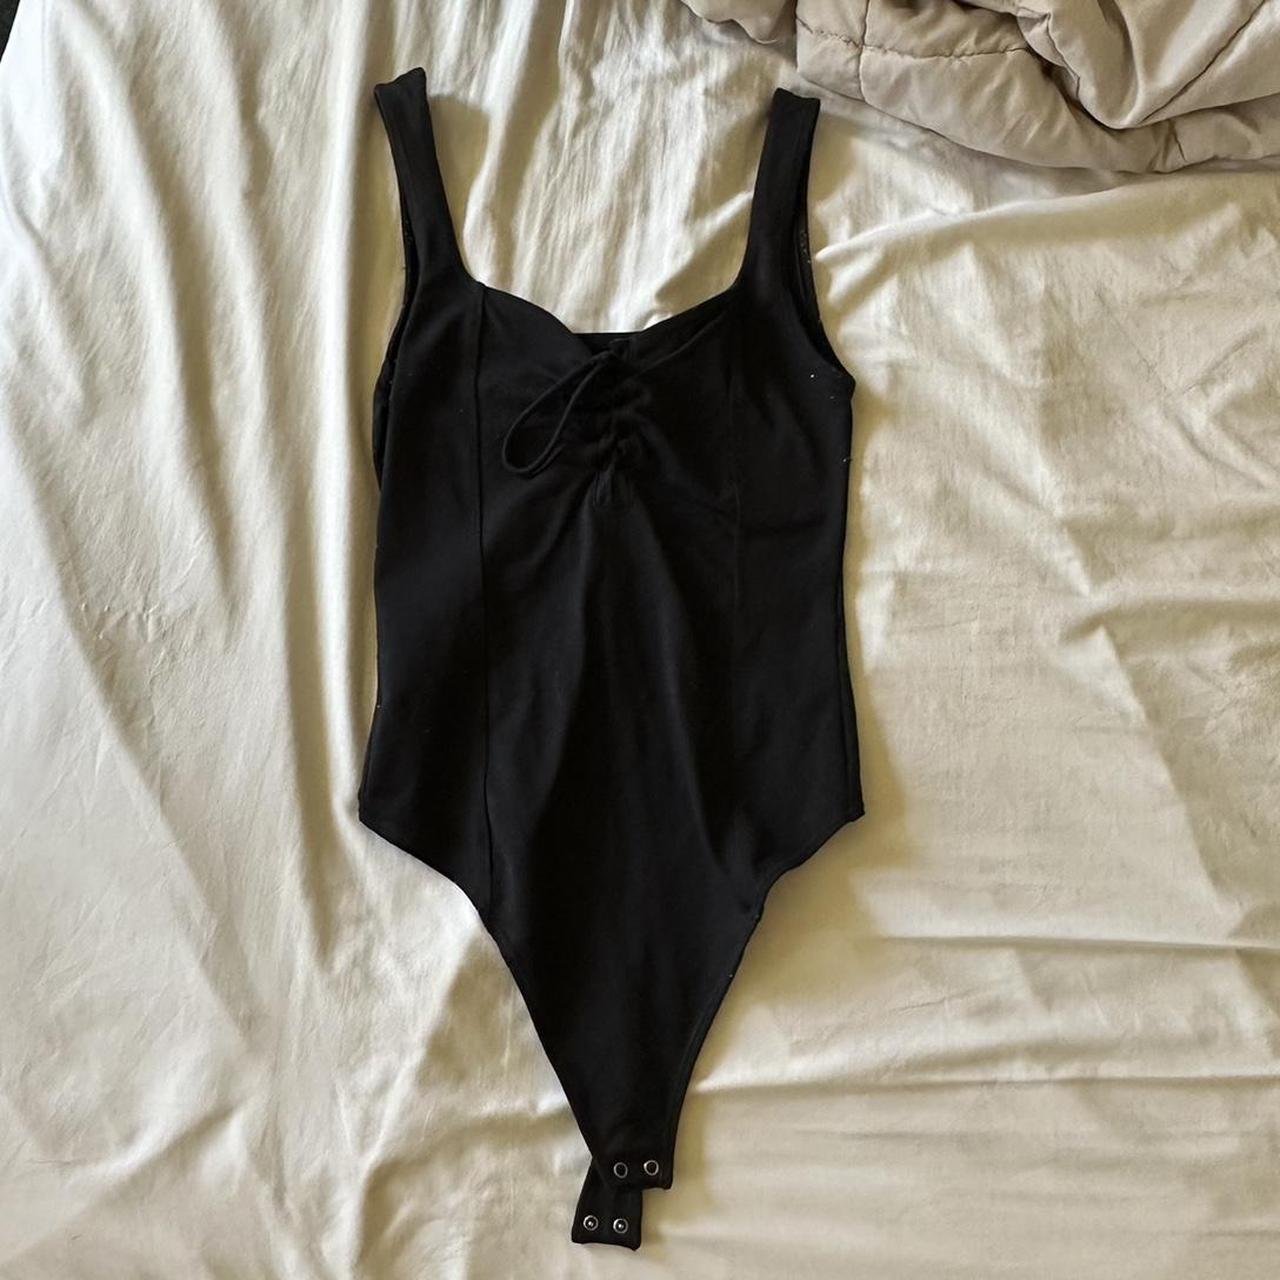 Abercrombie & Fitch Lace Bodysuit in Black